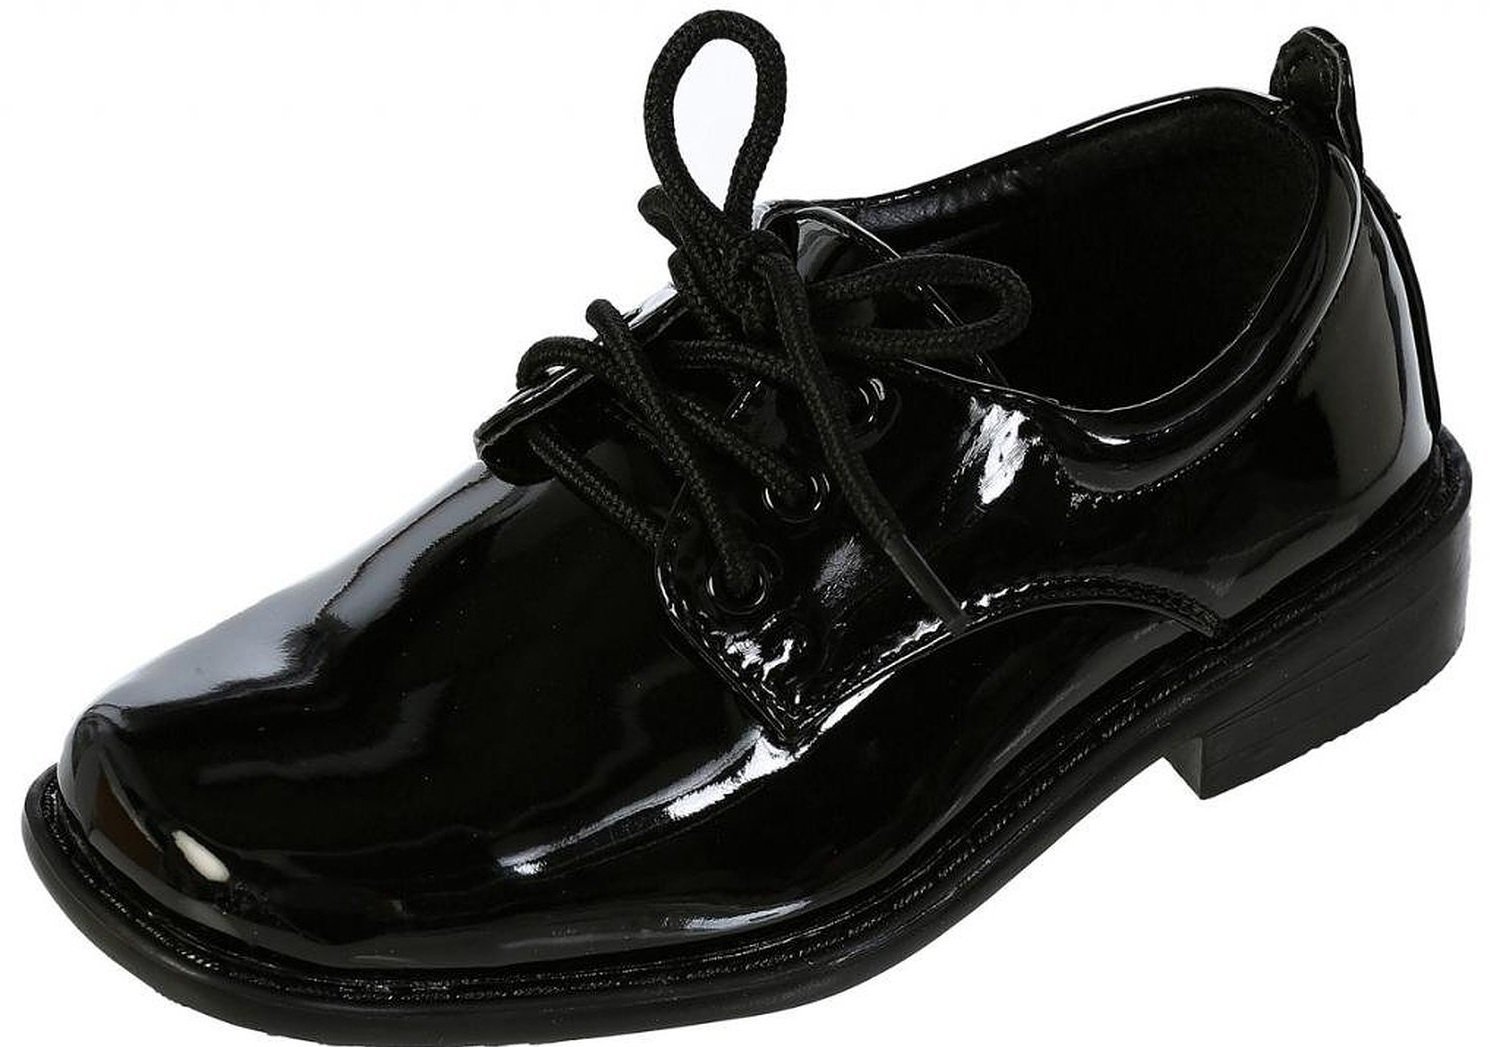 Boys Square Toe Lace Up Oxford Patent Dress Shoes - Available in Black 2 Little Kid